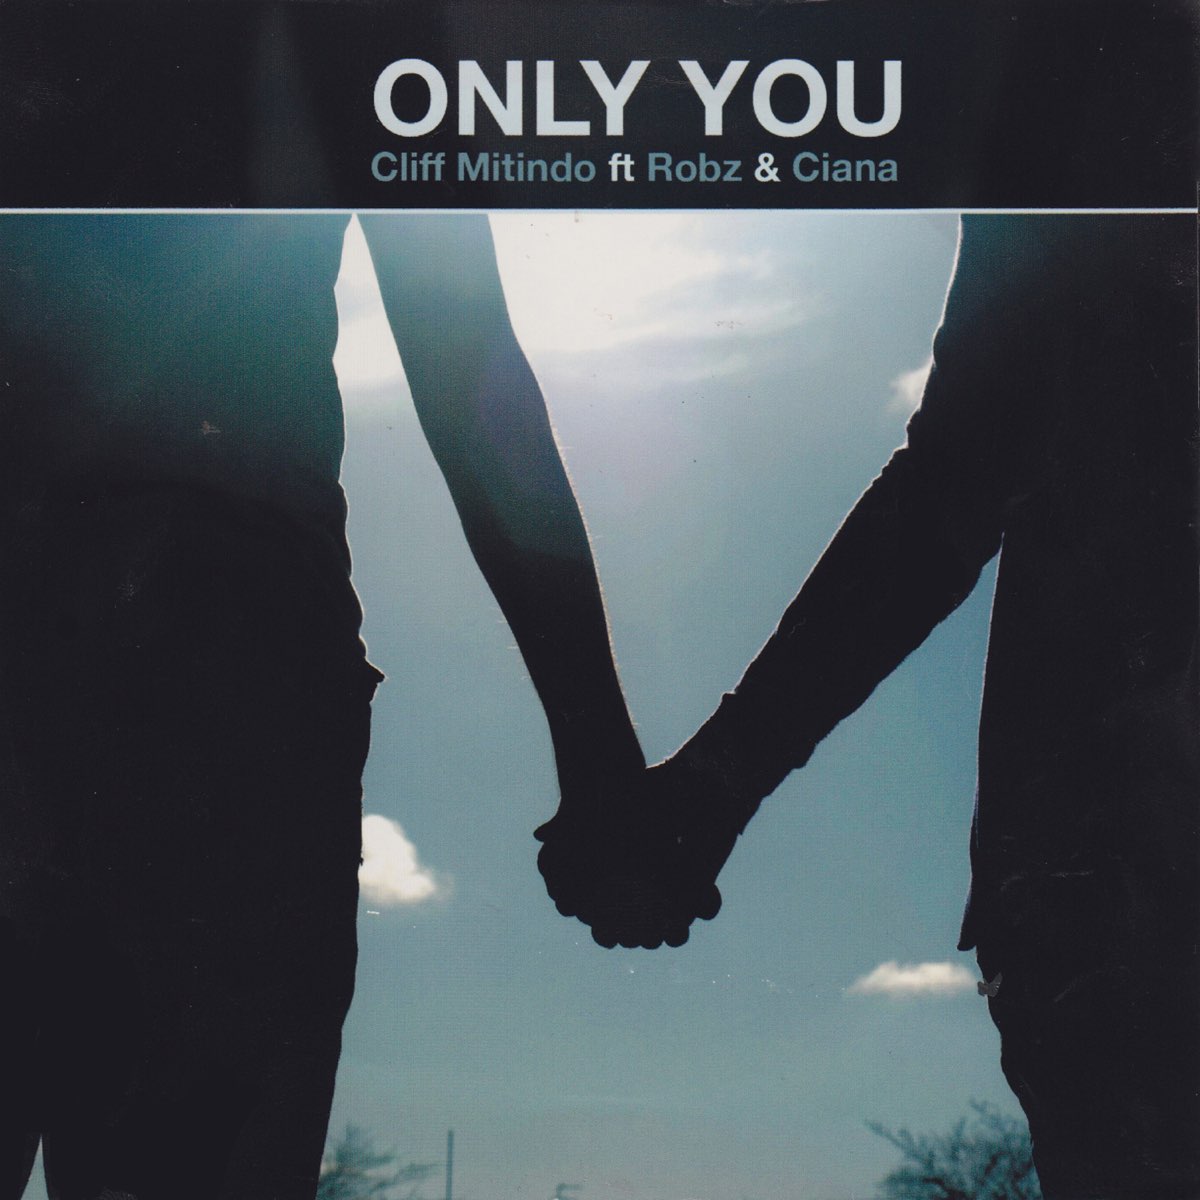 Музыка only you. Only you. Only you картинки. Only you only you. Надпись only you.